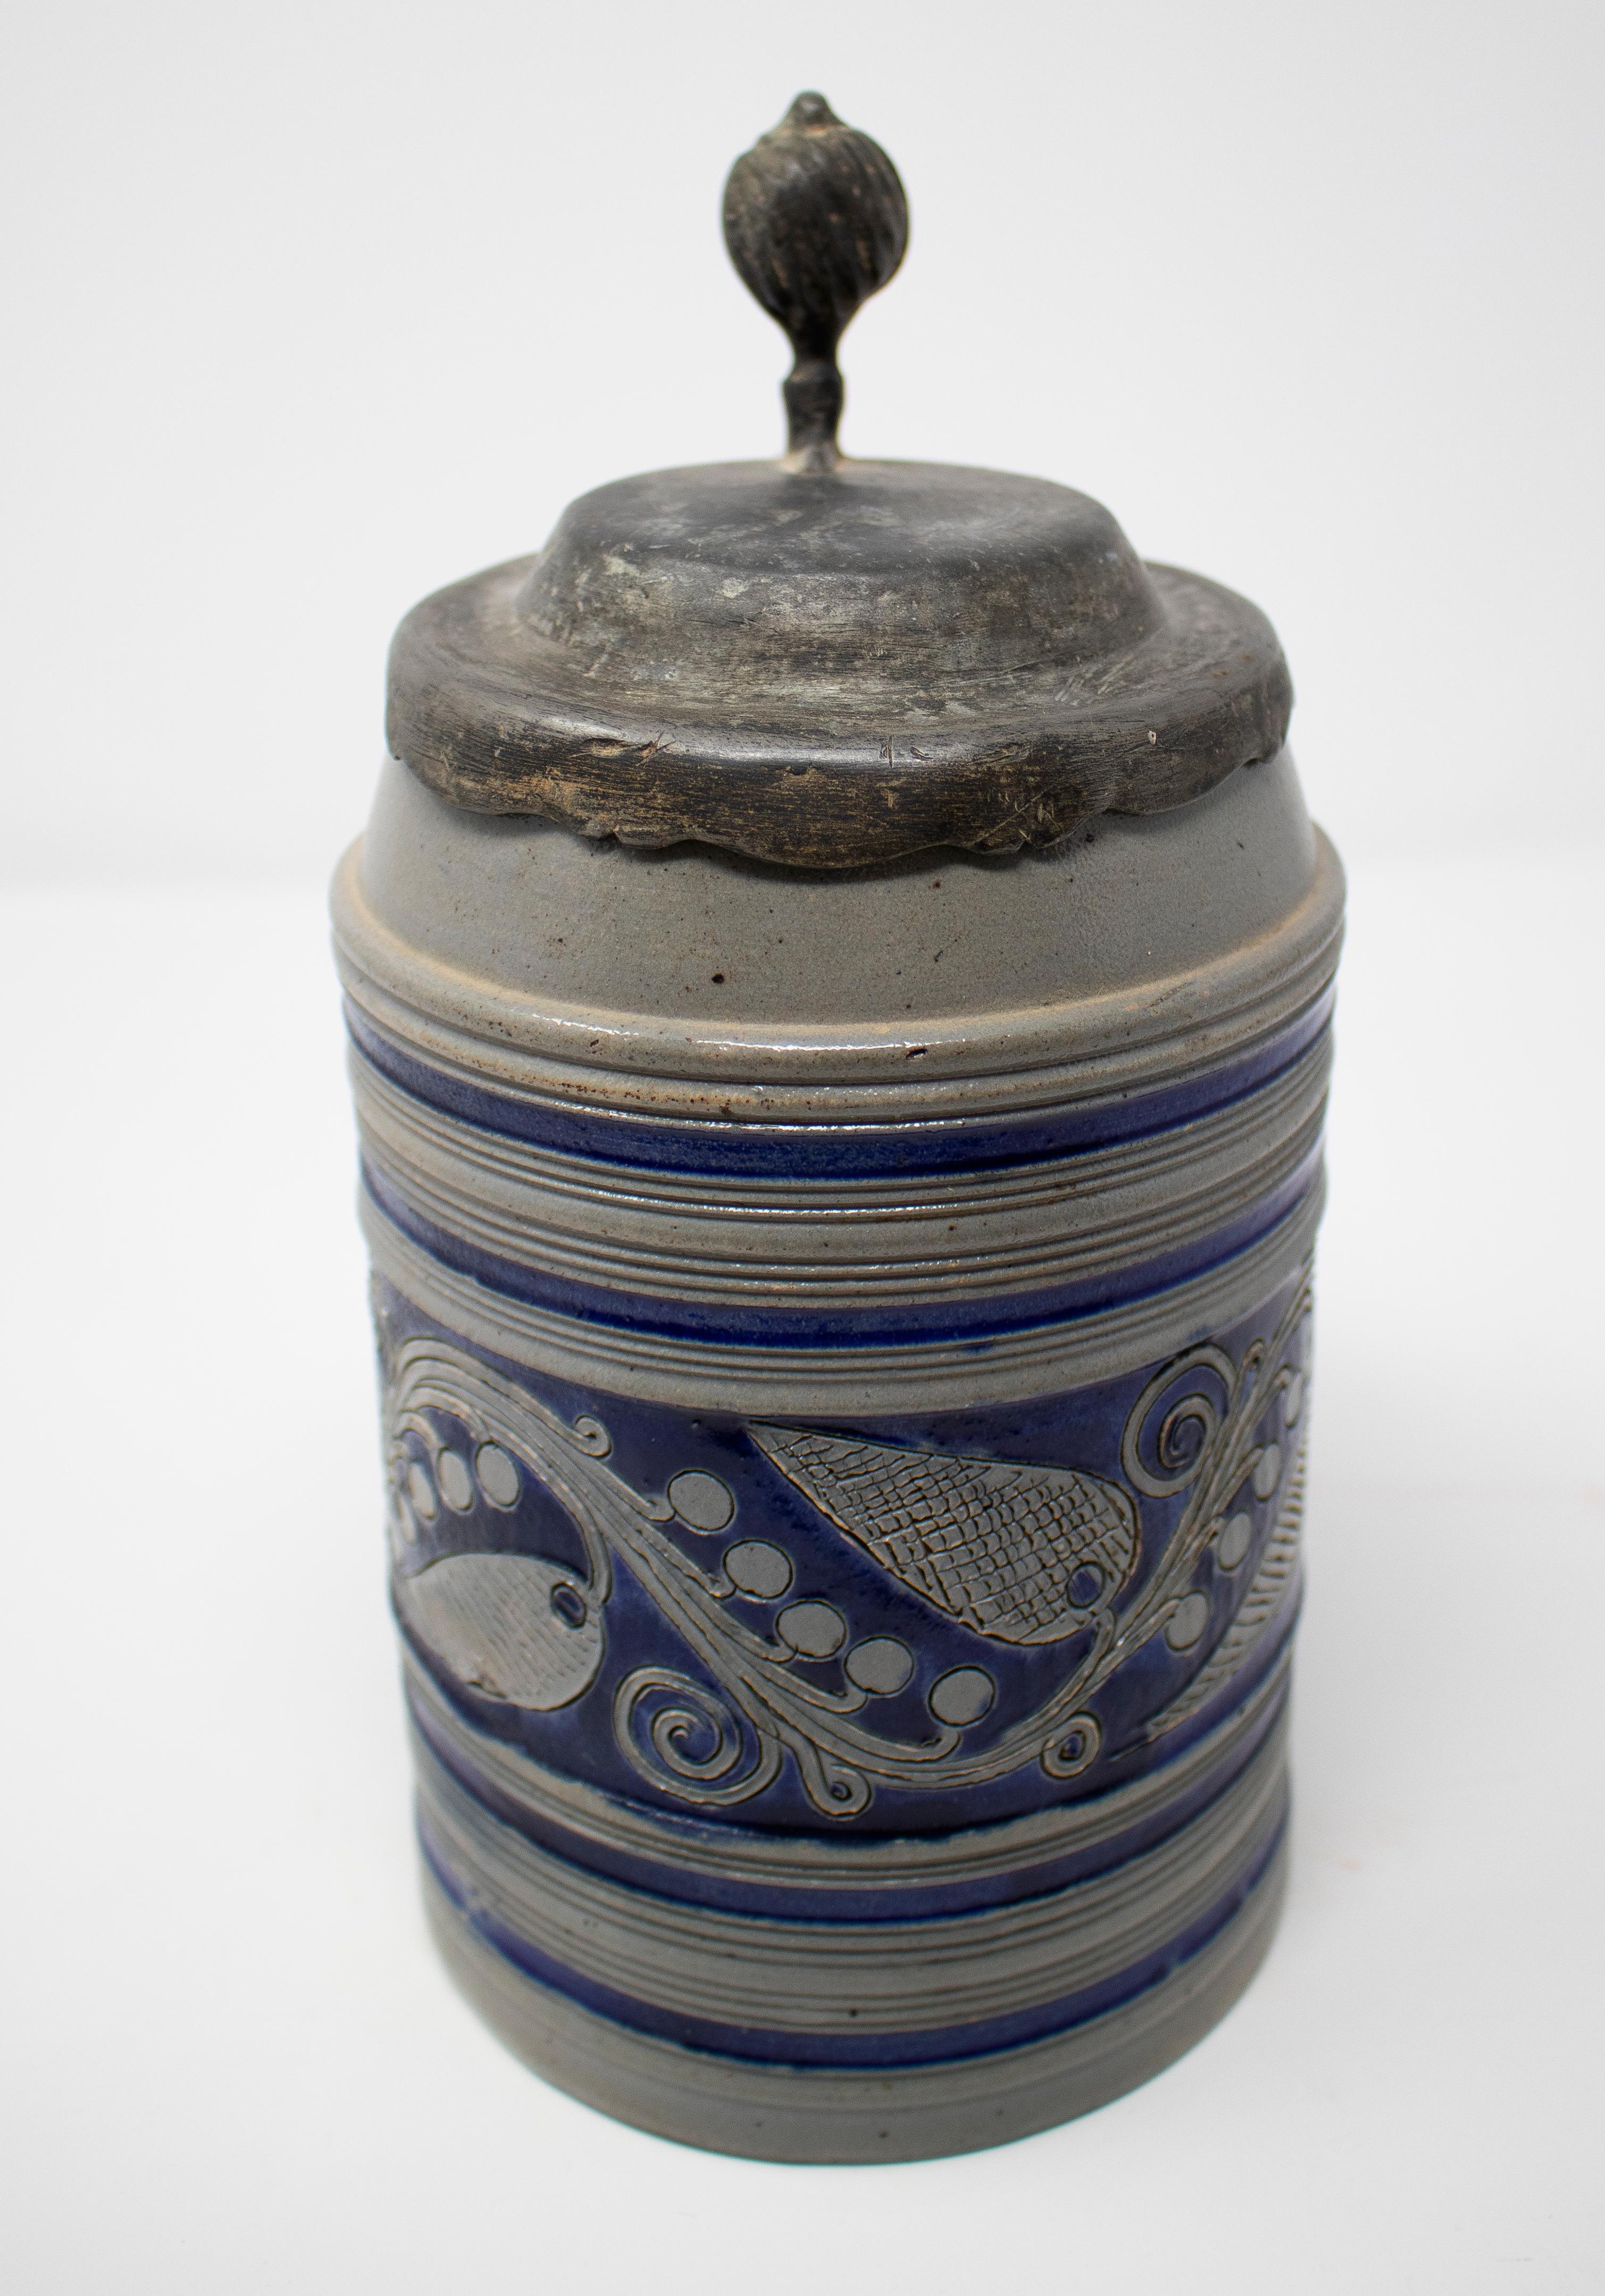 19th century German earthenware beer stein mug with tin lid and cobalt blue ornamental decorations.